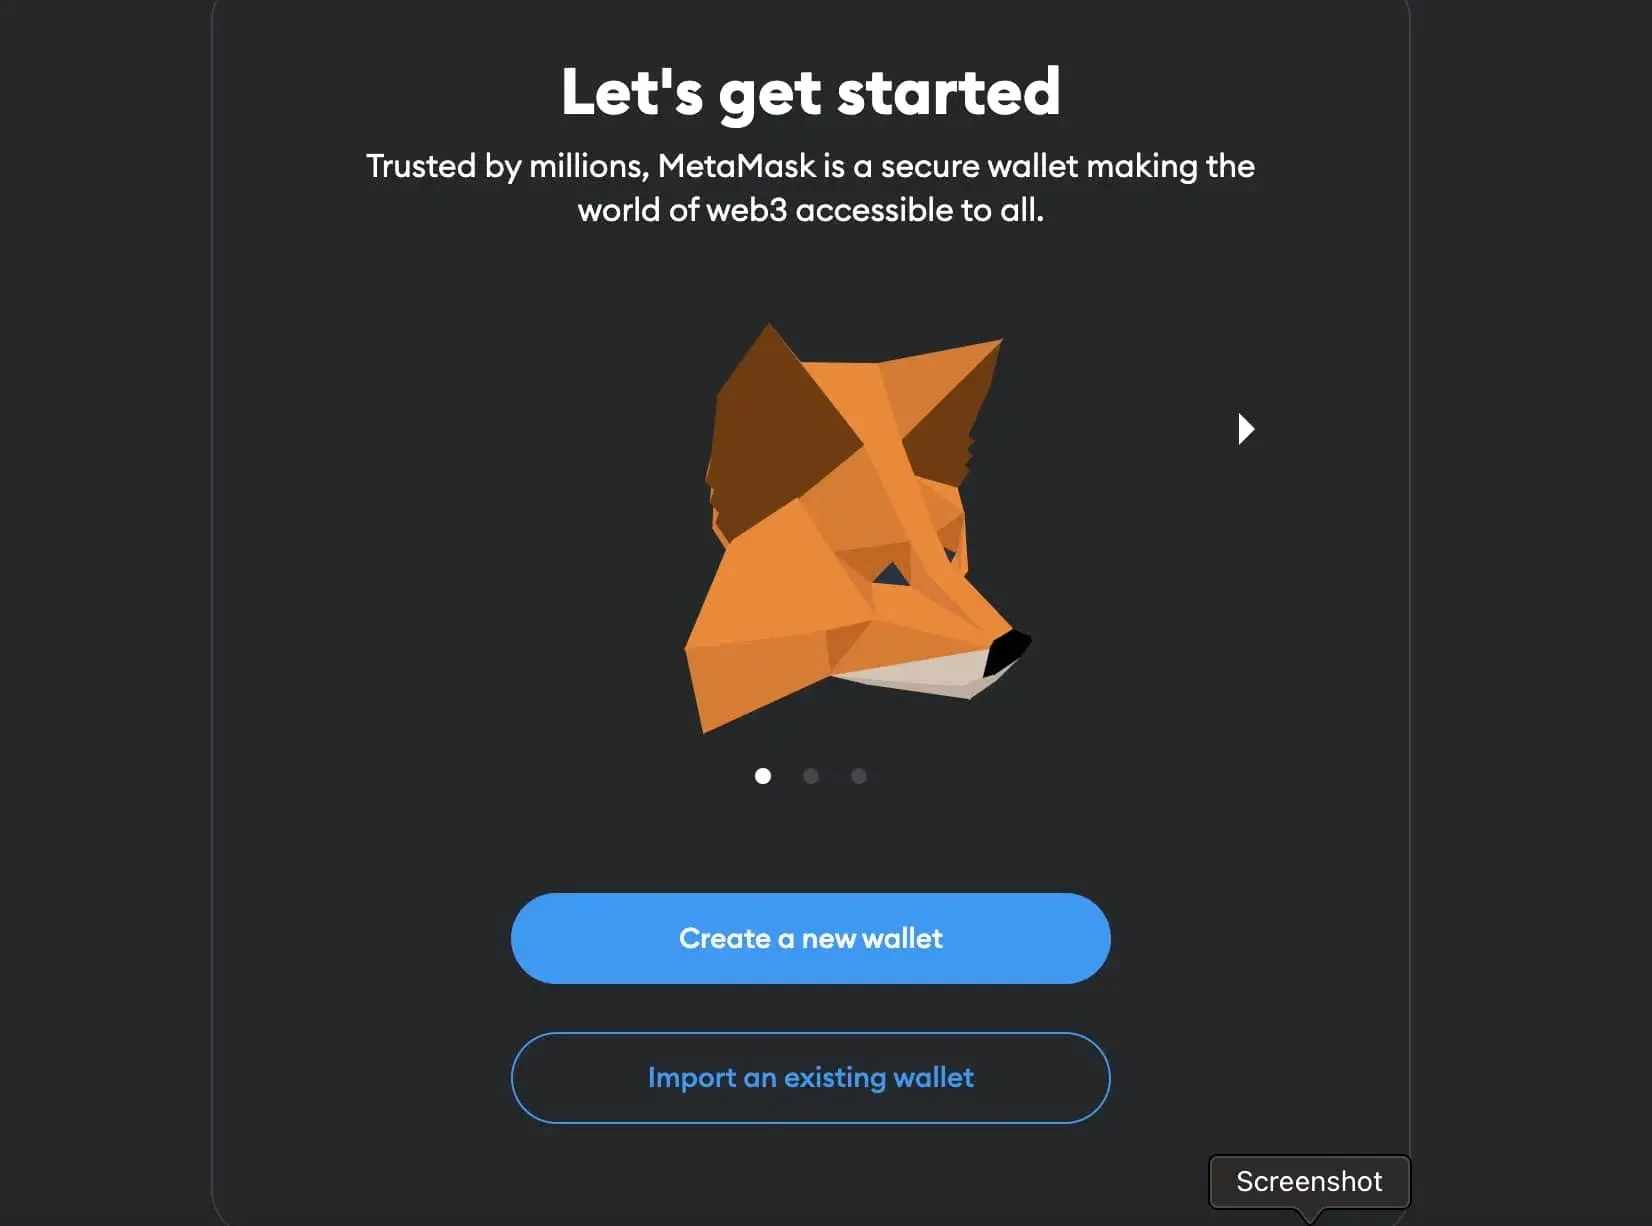 Step 2: Launch MetaMask and Set Up a New Wallet